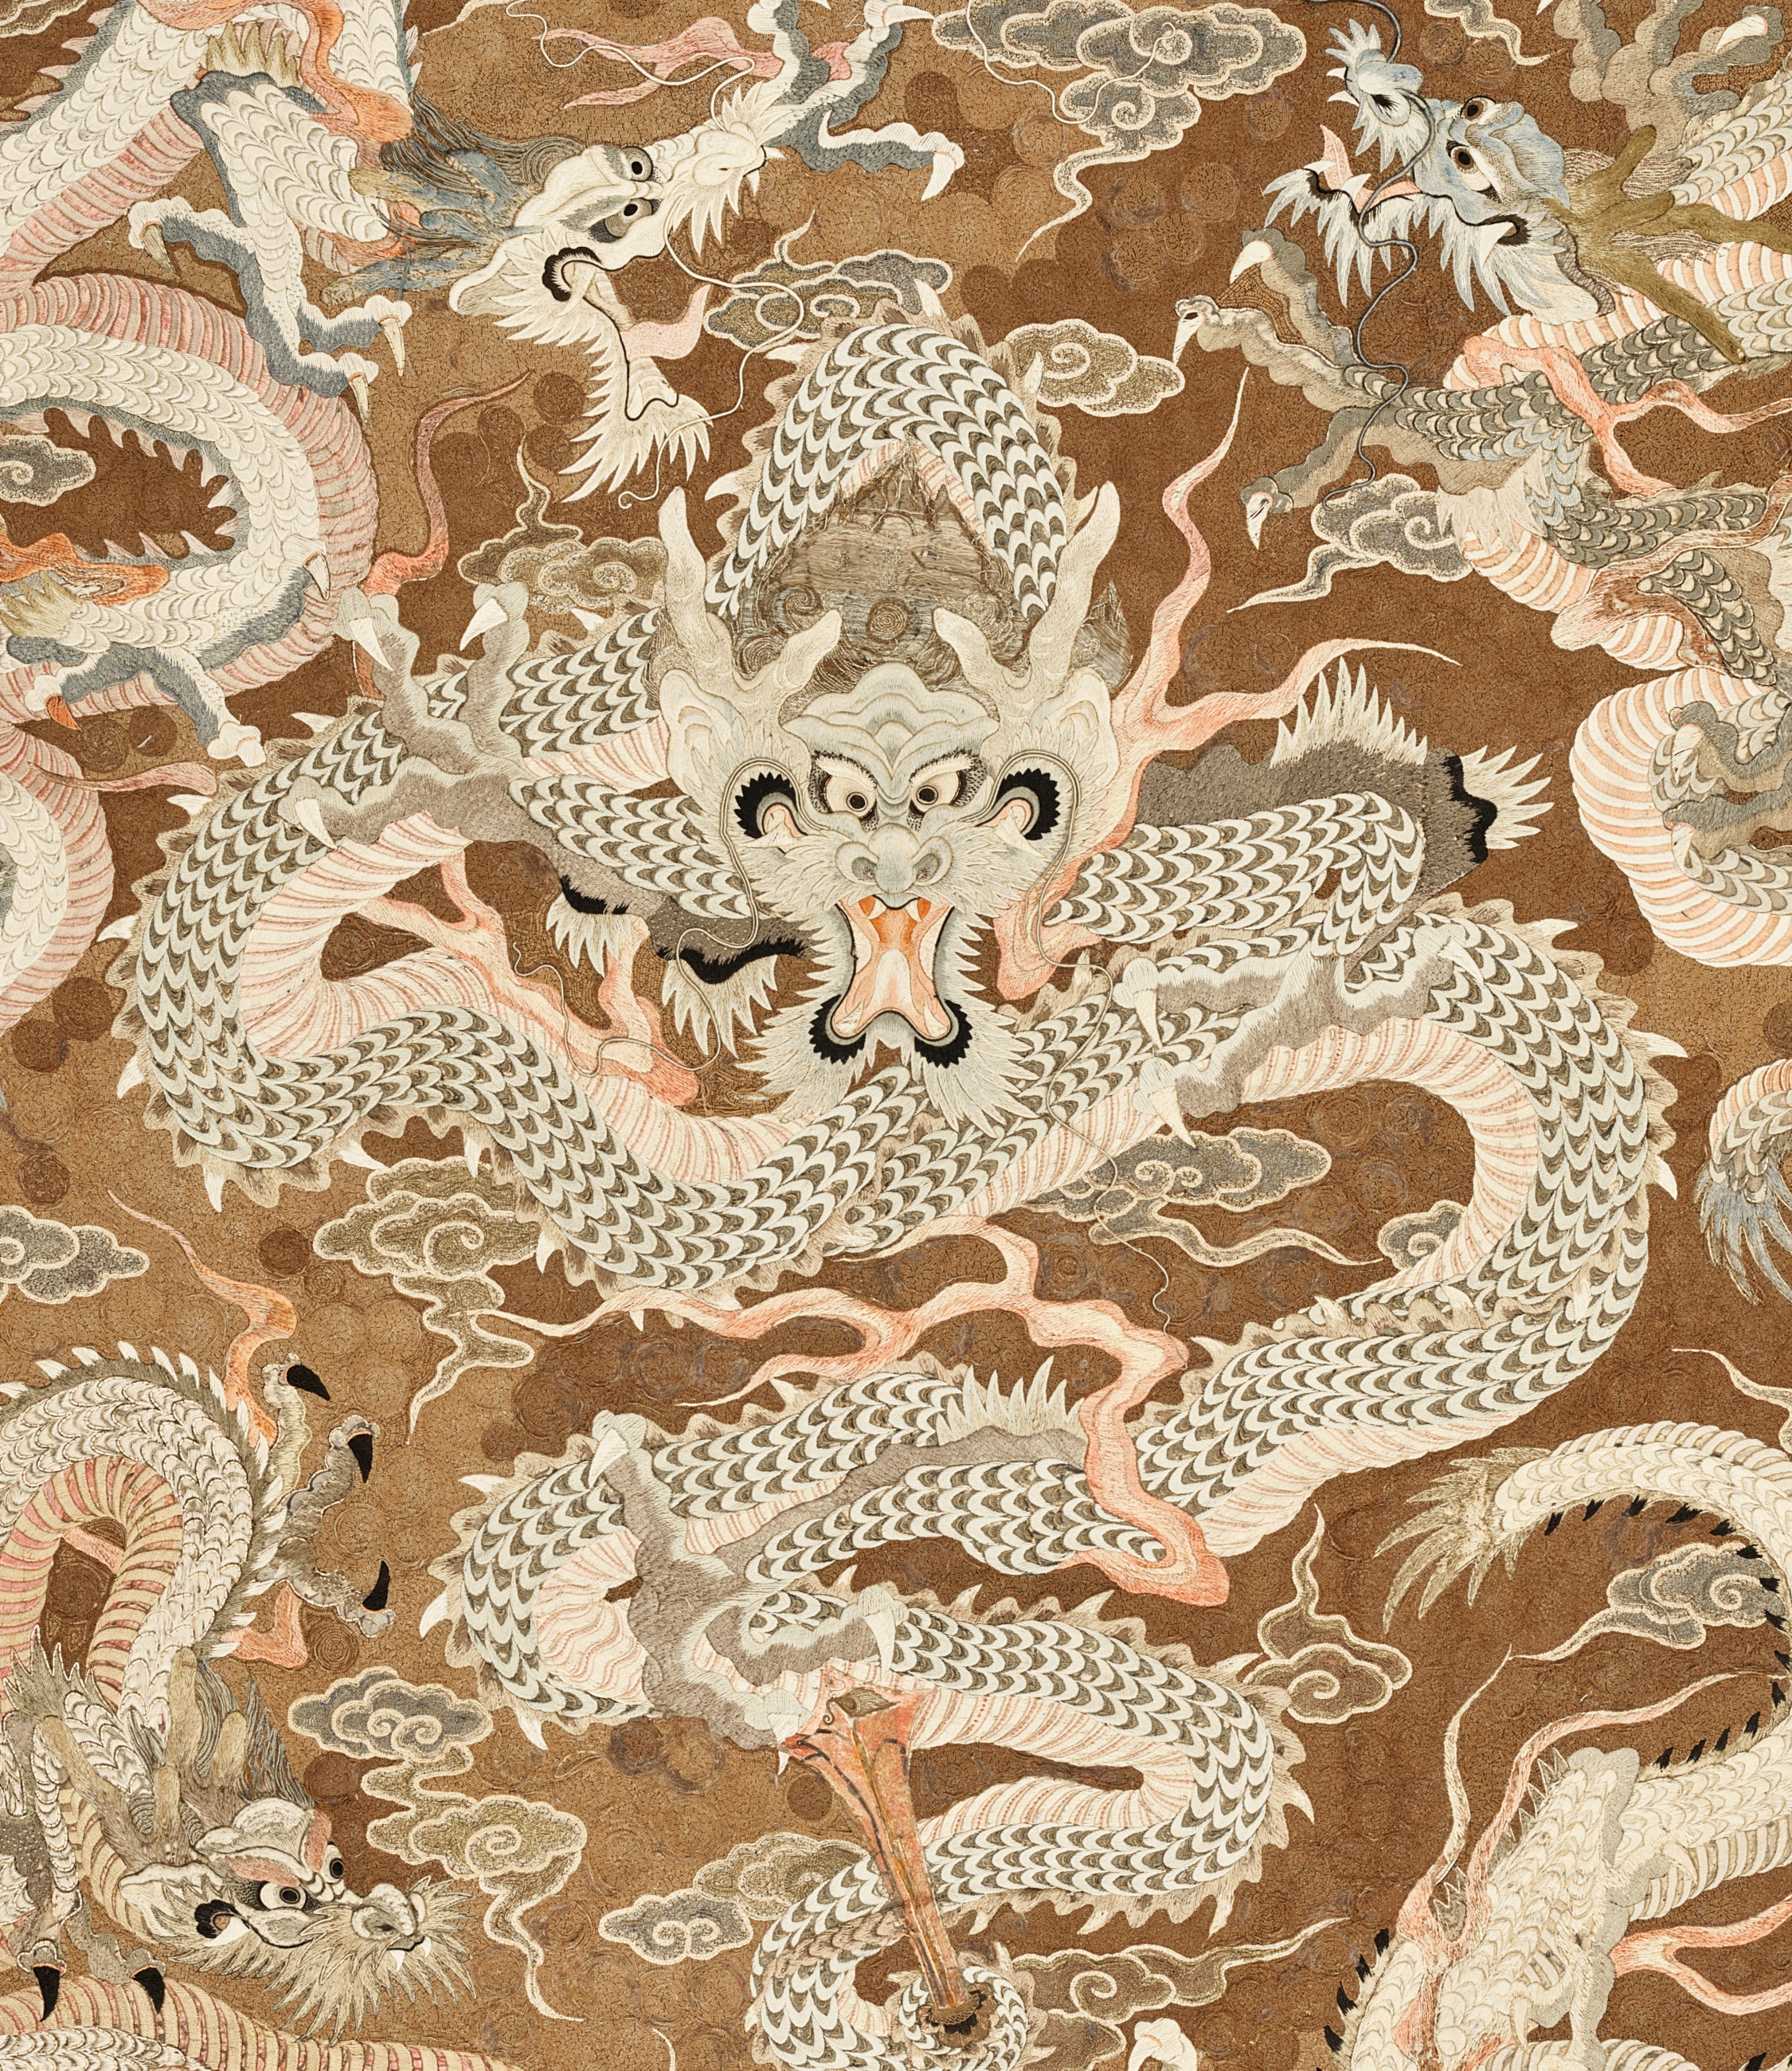 AN EXCEPTIONAL AND VERY LARGE SILK EMBROIDERED 'SEVEN DRAGON' WALL HANGING